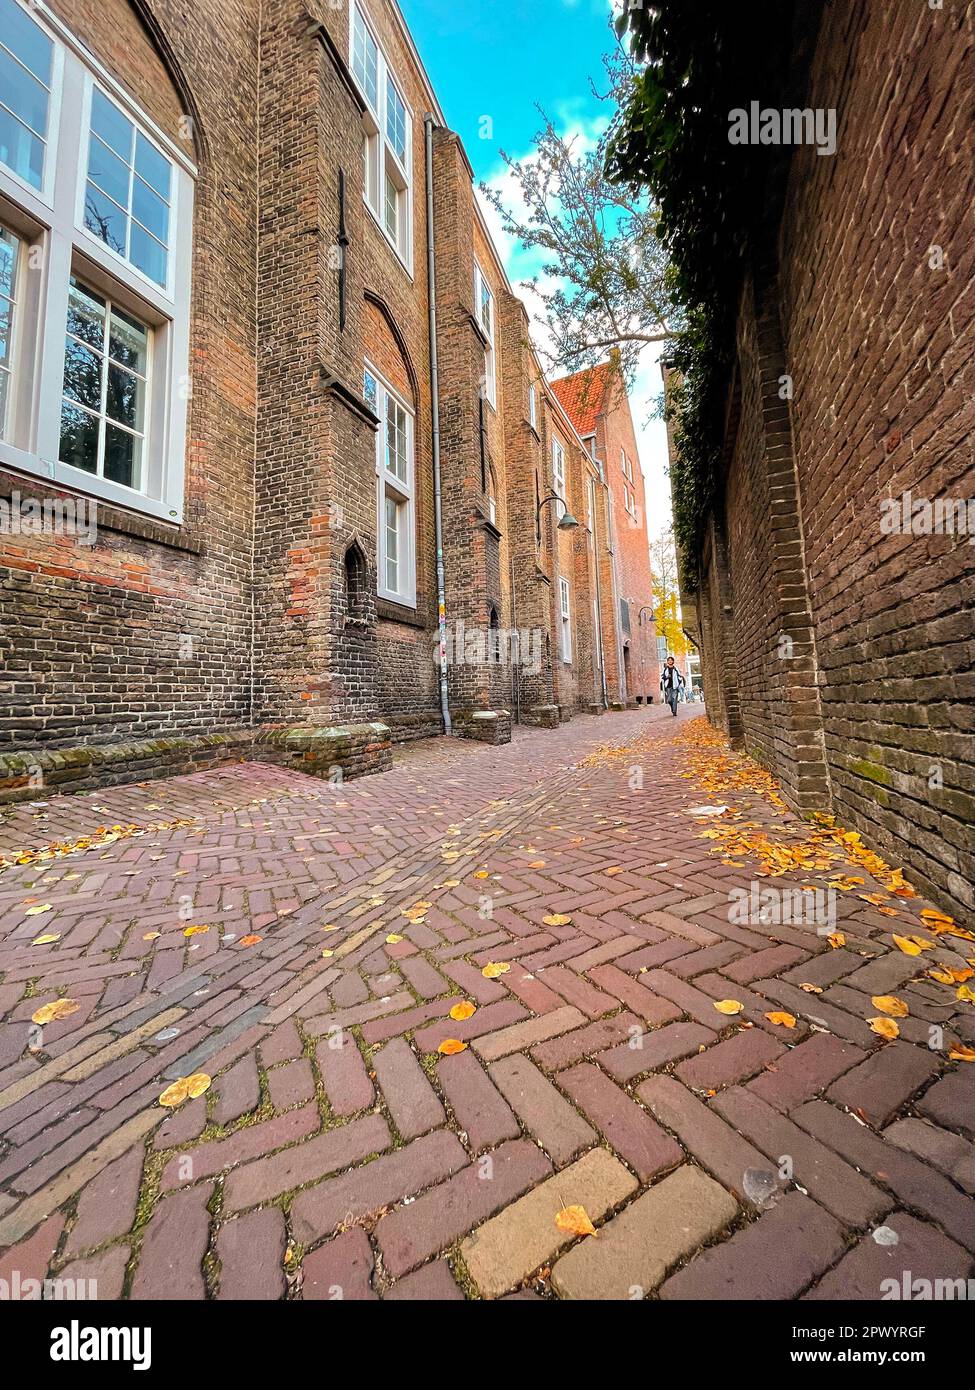 Delft, The Netherlands - October 15, 2021: Street view and city scenes in Delft, a beautiful small city in the Netherlands. Stock Photo